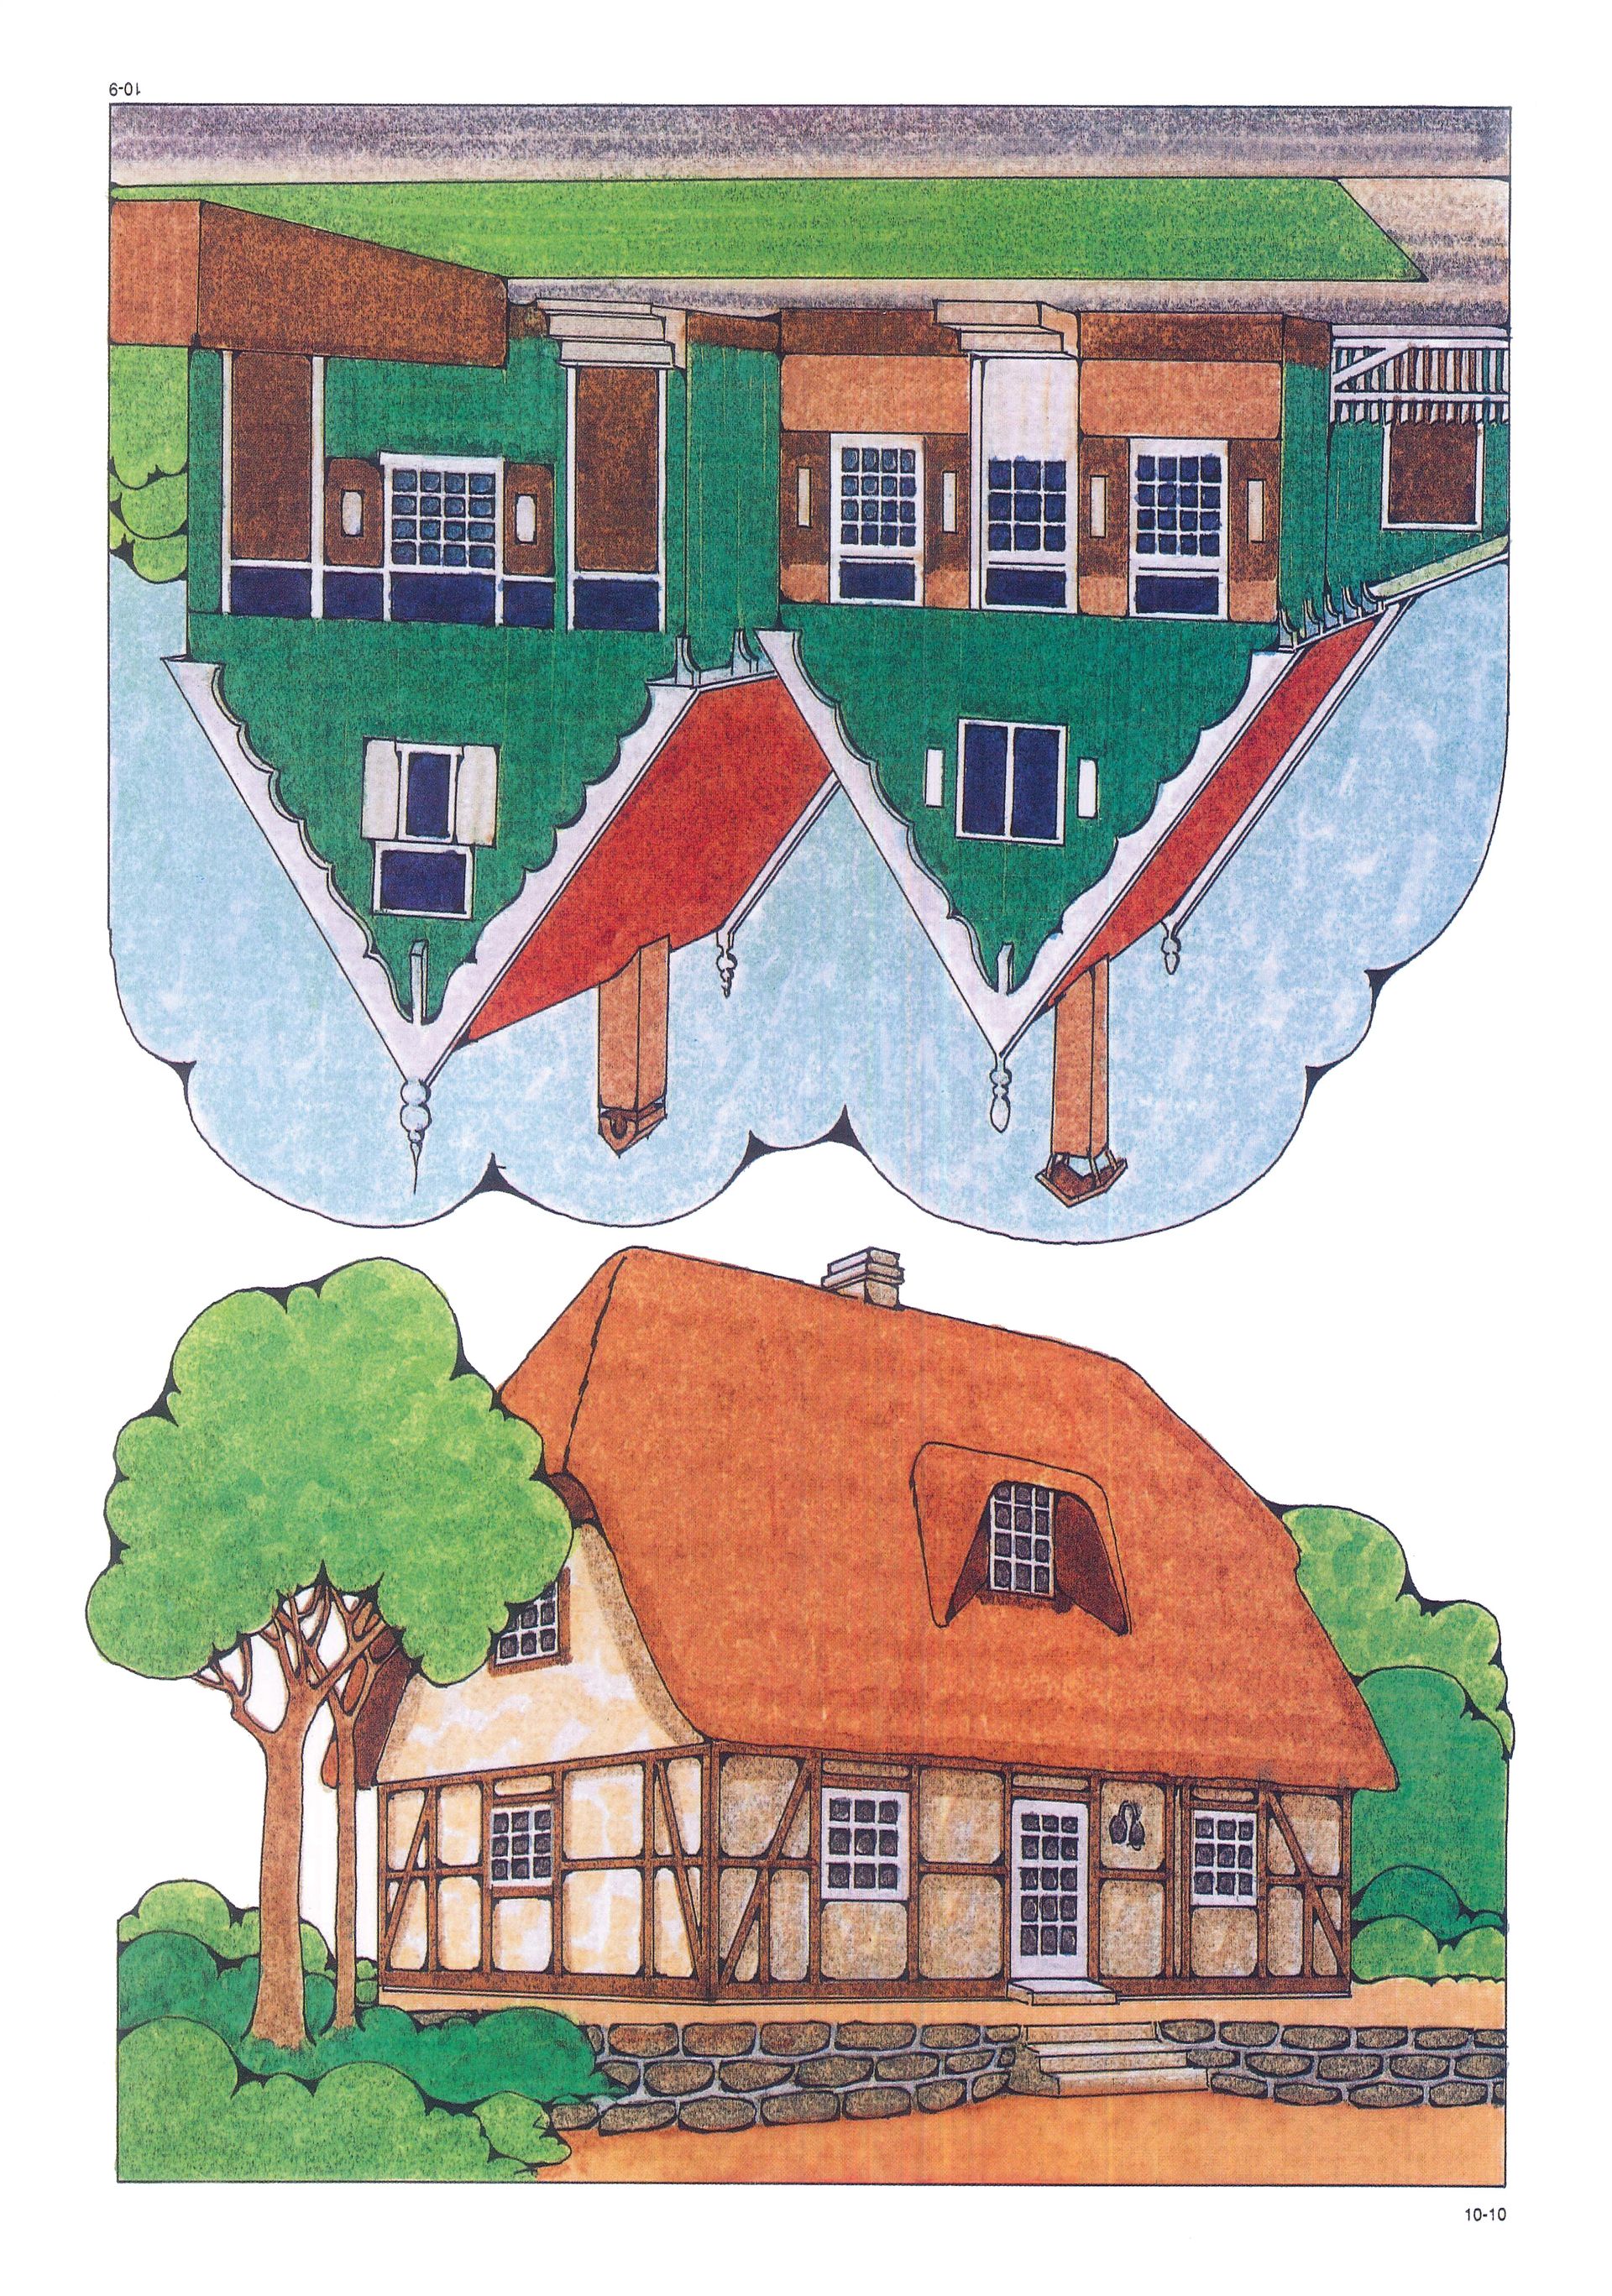 Primary Visual Aids: Cutouts 10-9, European Home; 10-10, Thatched-Roof Home.